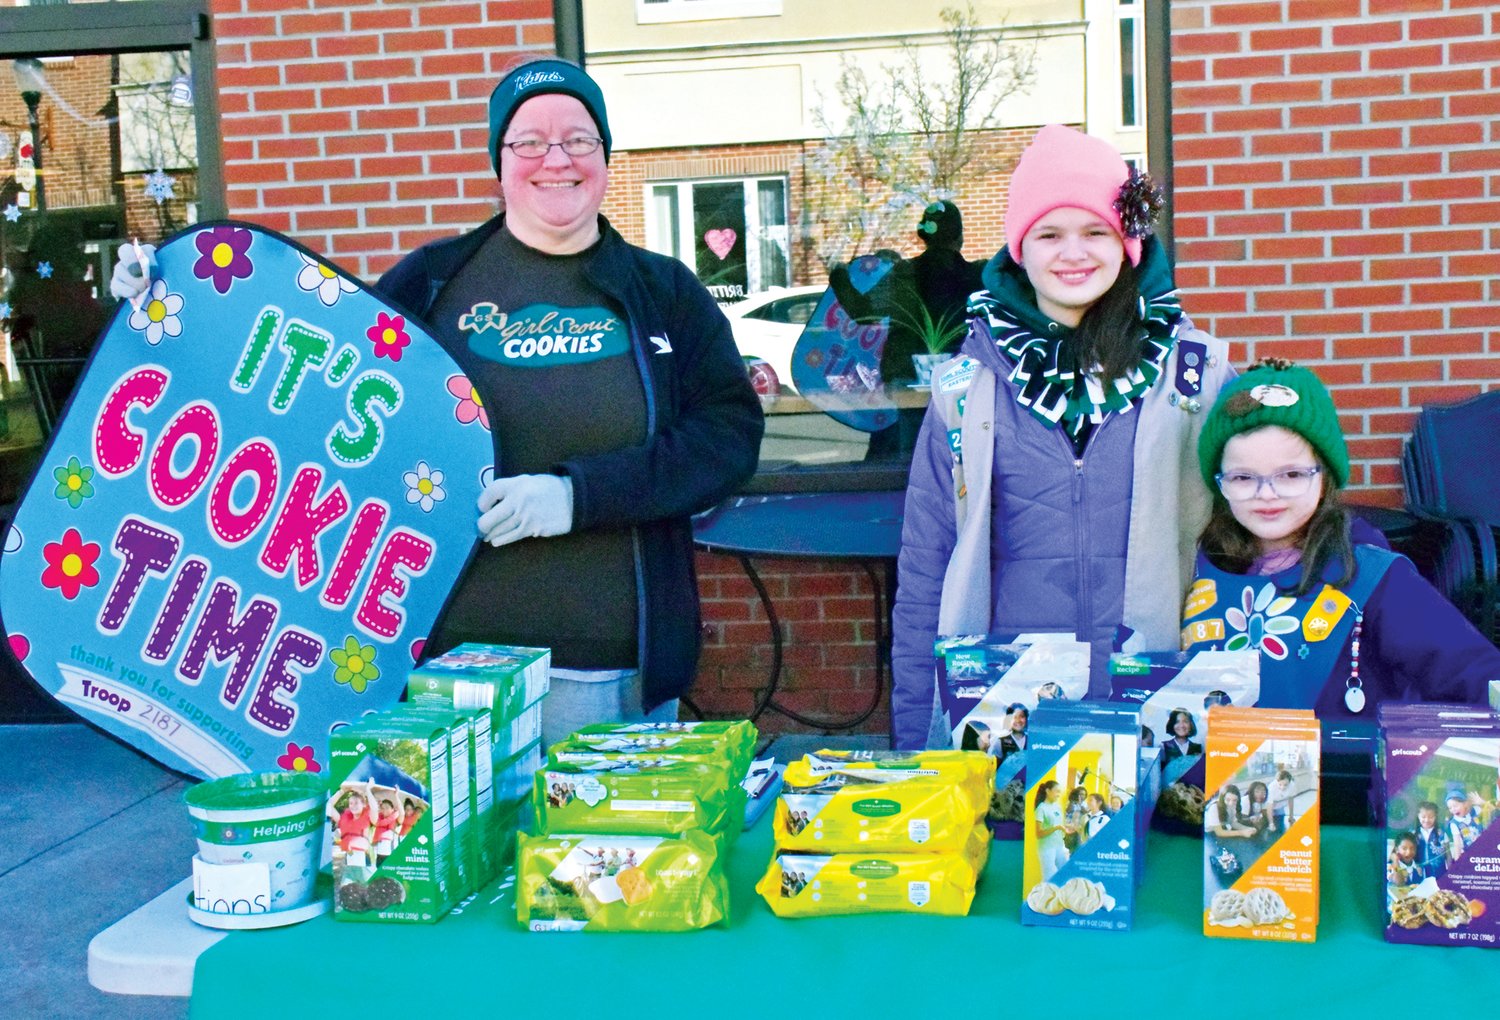 Megan Dean, left, and daughters Anna and Paige of Girl Scout Troop #2187 sell Girl Scout cookies on the sidewalk outside of Rise & Grind Cafe in Perkasie during the 'Winter Wanderland' celebration in downtown Perkasie on Jan. 28.